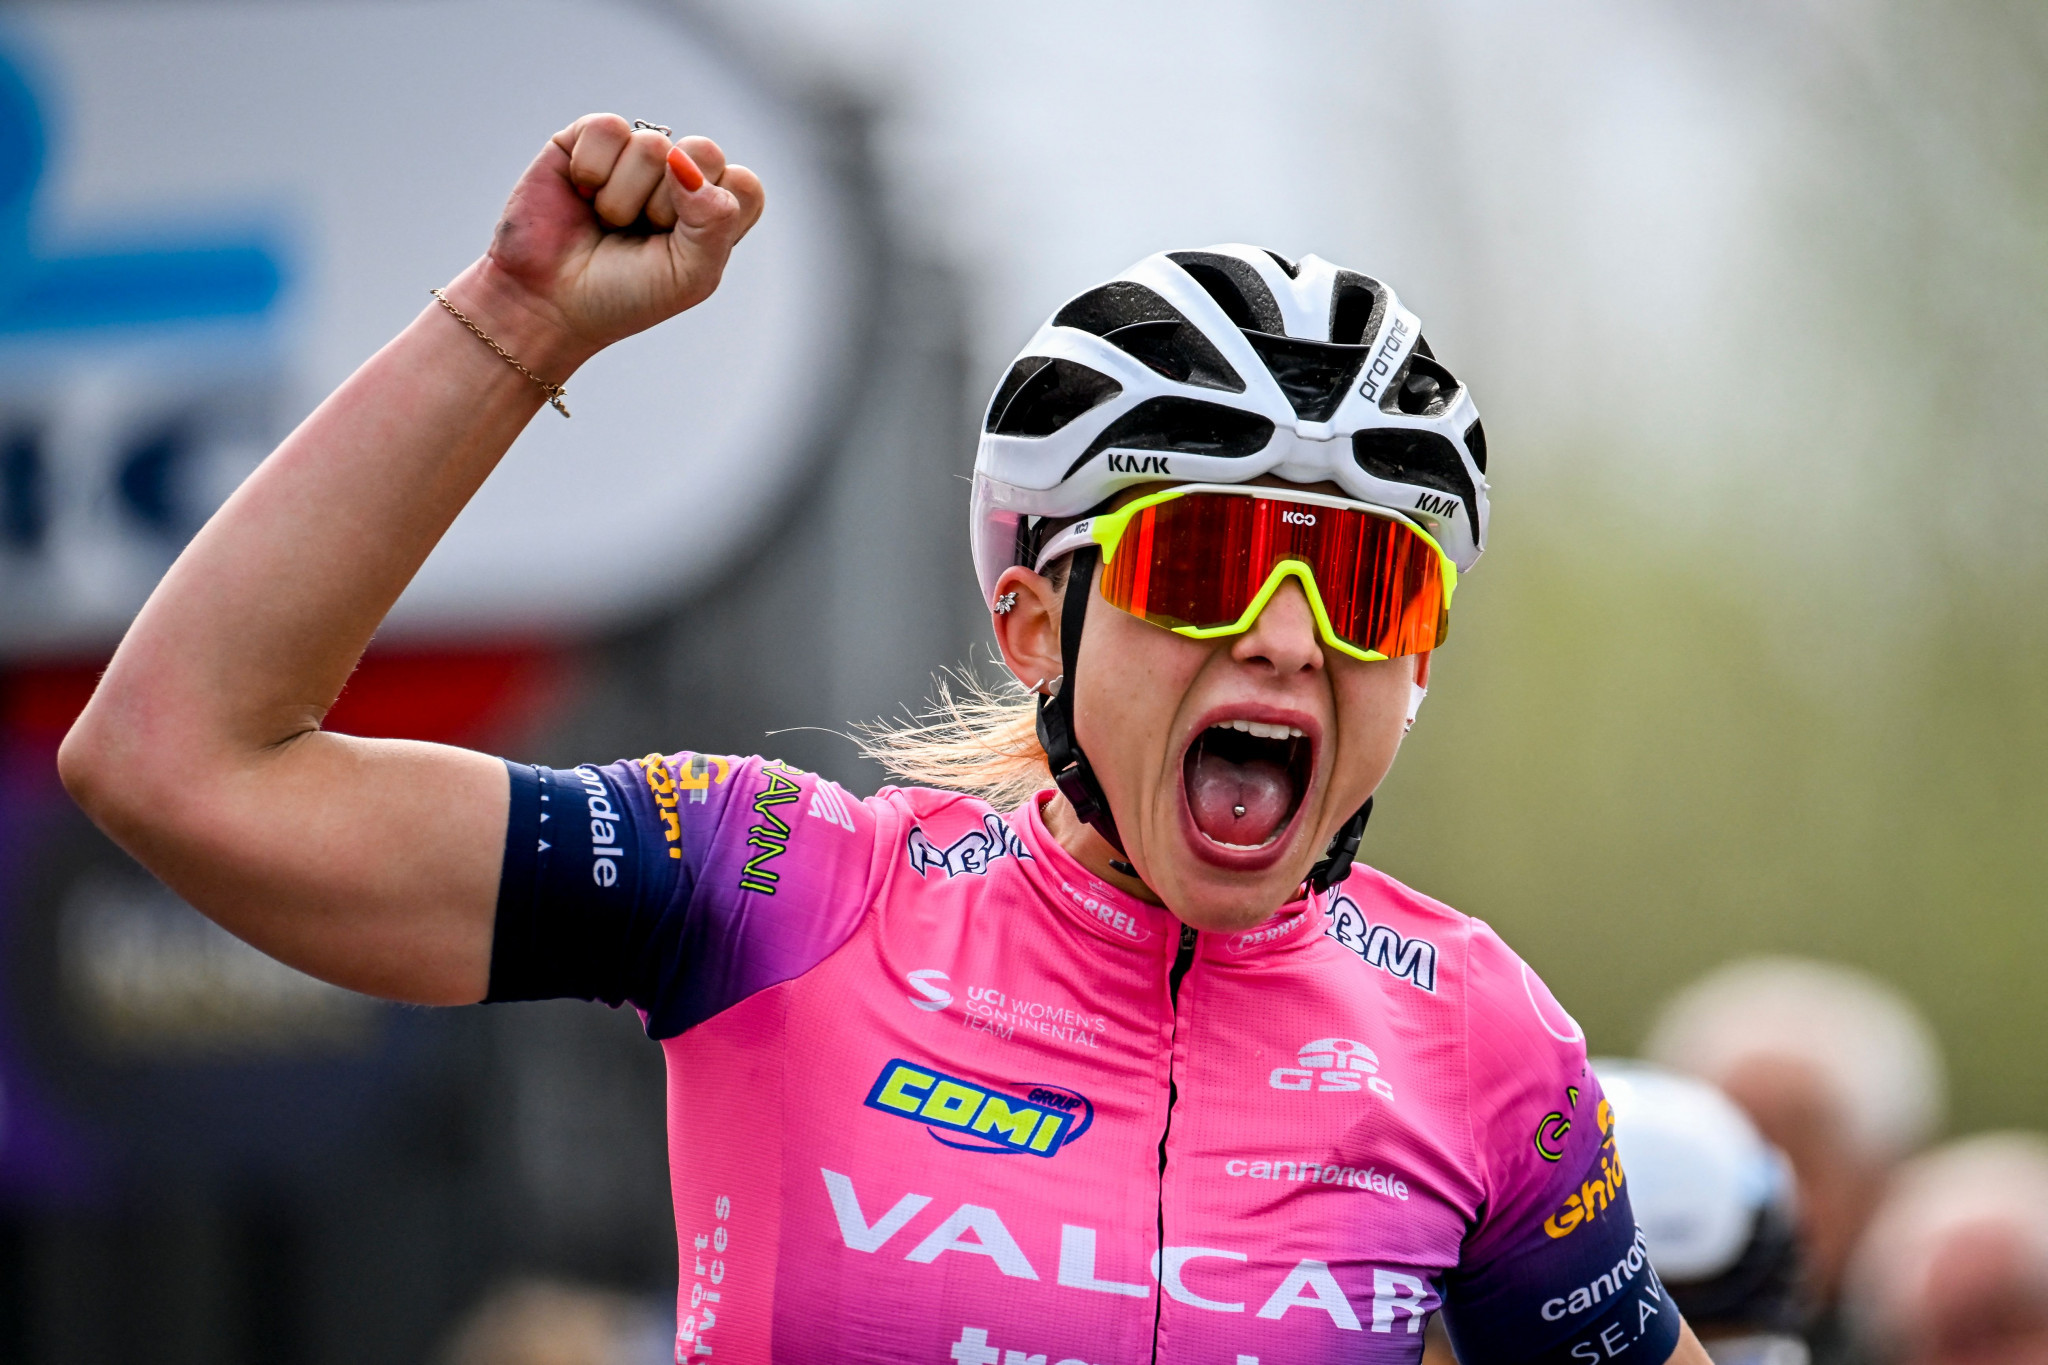 Italy's Chiara Consonni won stage three and the overall title in the UCI Women's World Tour race on Chongming Island in China ©Getty Images